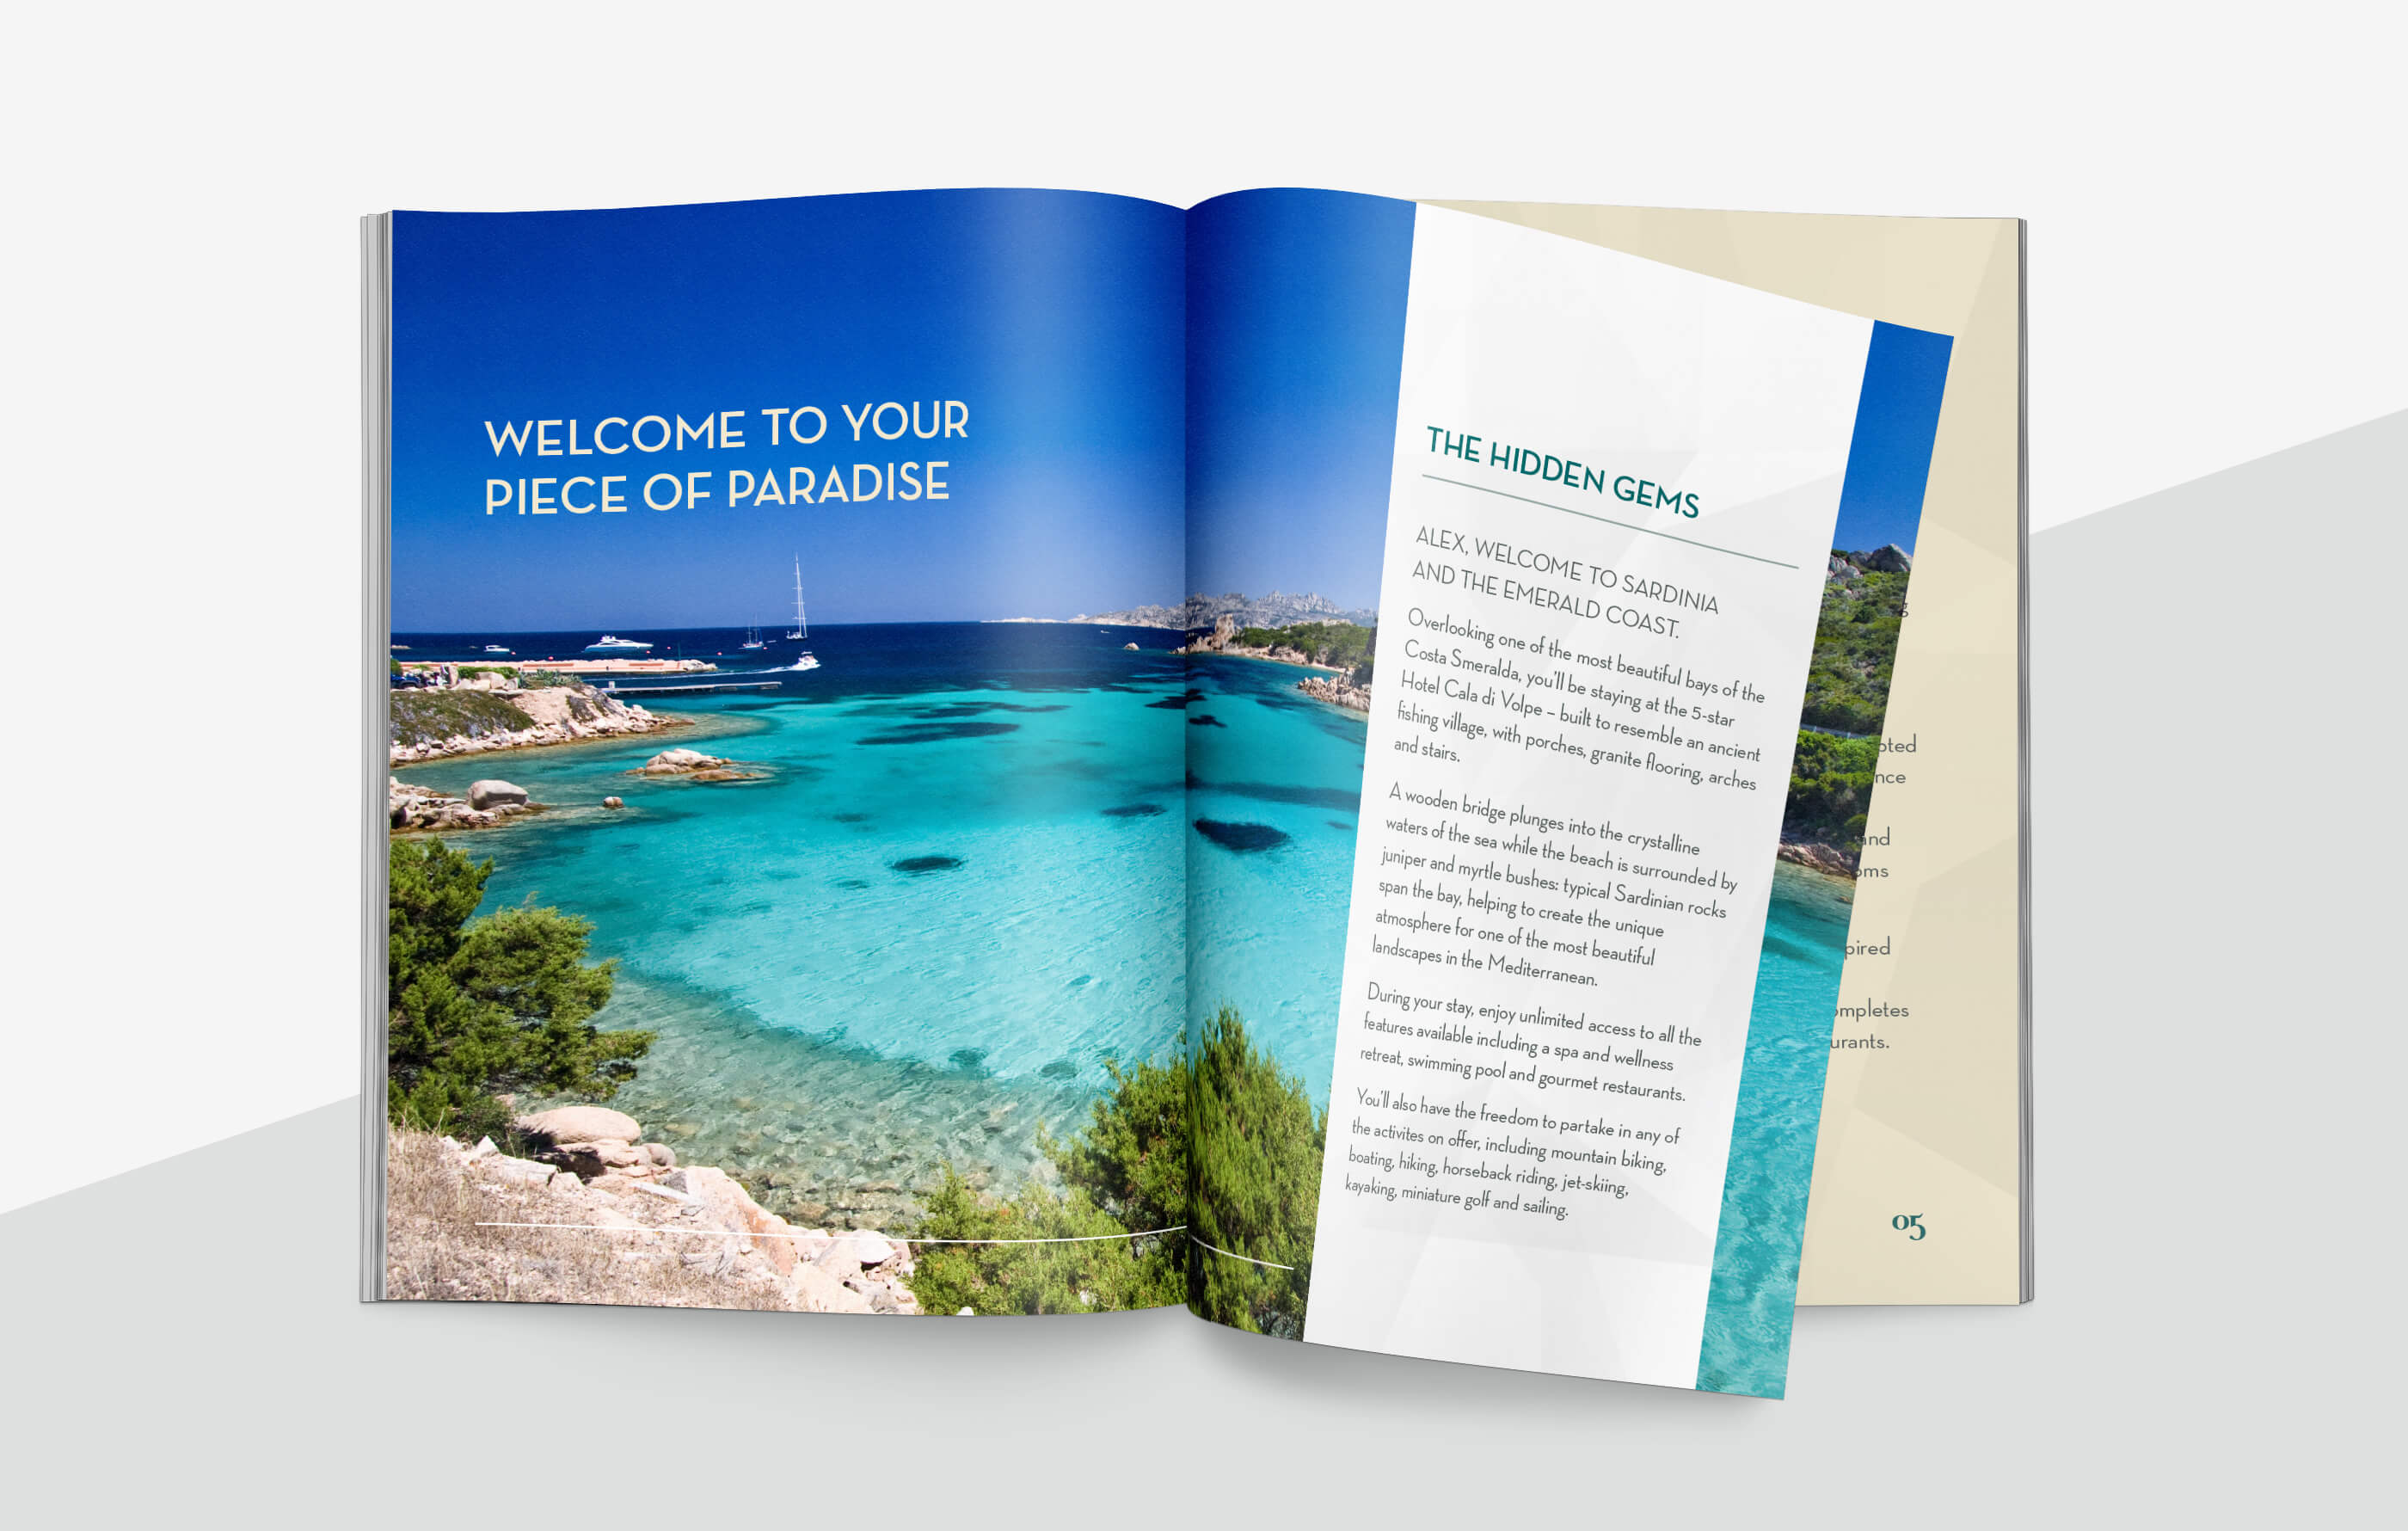 Opening spread of a winner's welcome booklet, featuring a double page image of turquoise water in a sandy bay and white sailing boats in the distance